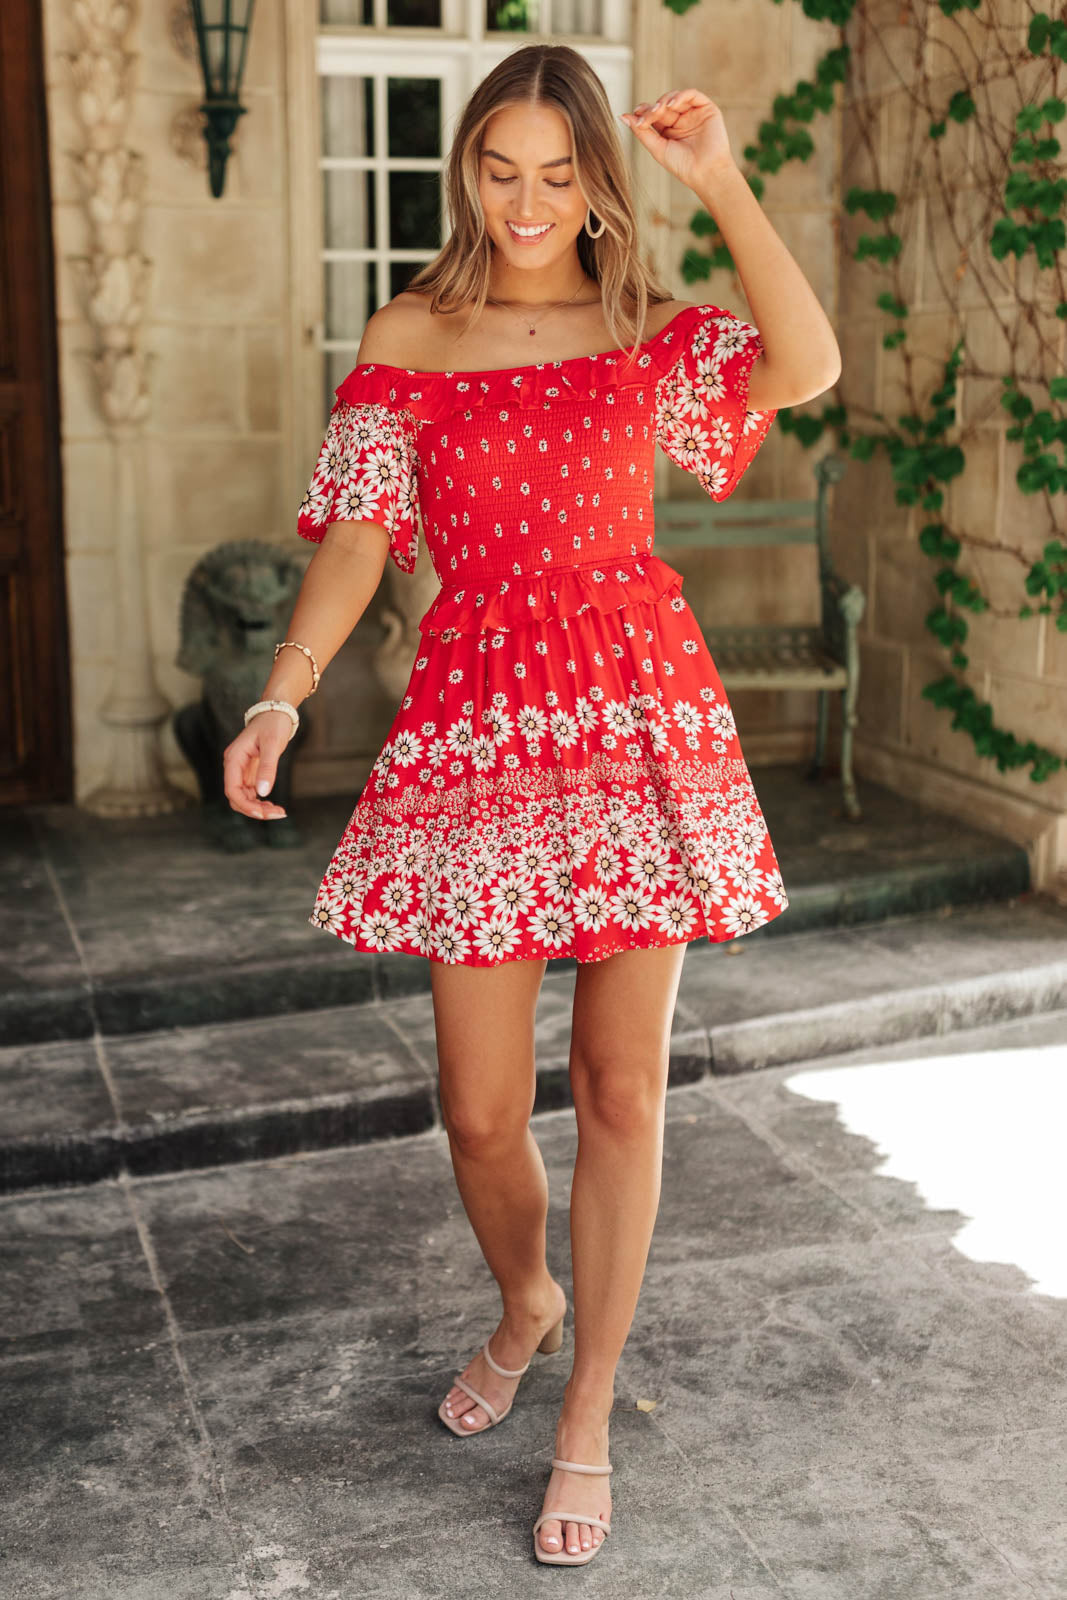 Daisy Chains Dress in Red